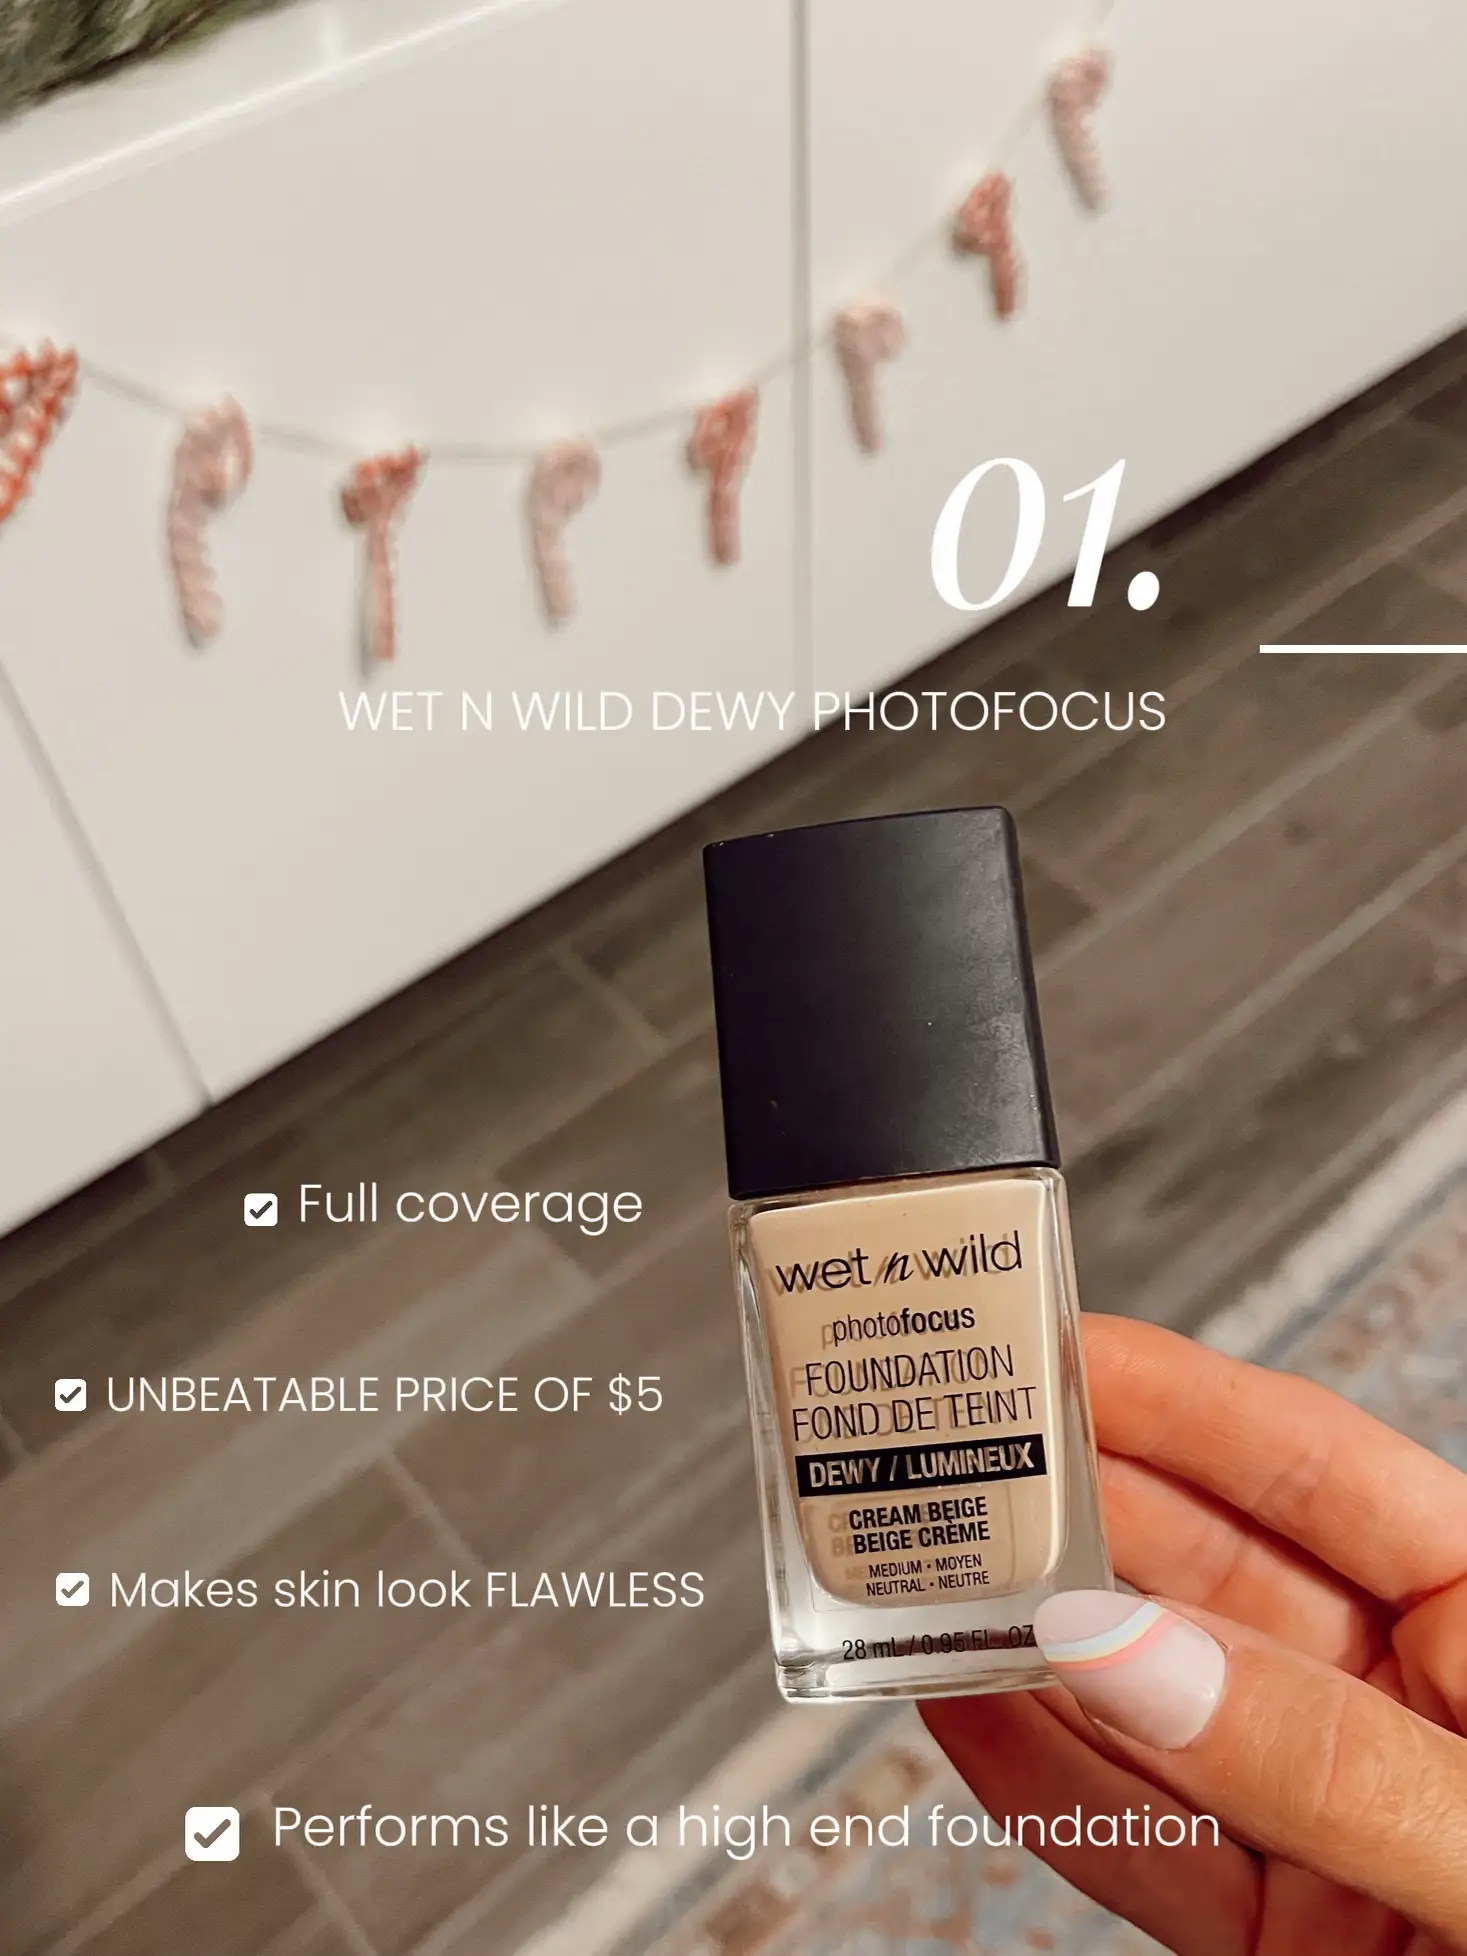  A bottle of Wet N Wild Photo Focus Foundation is being held by a person.